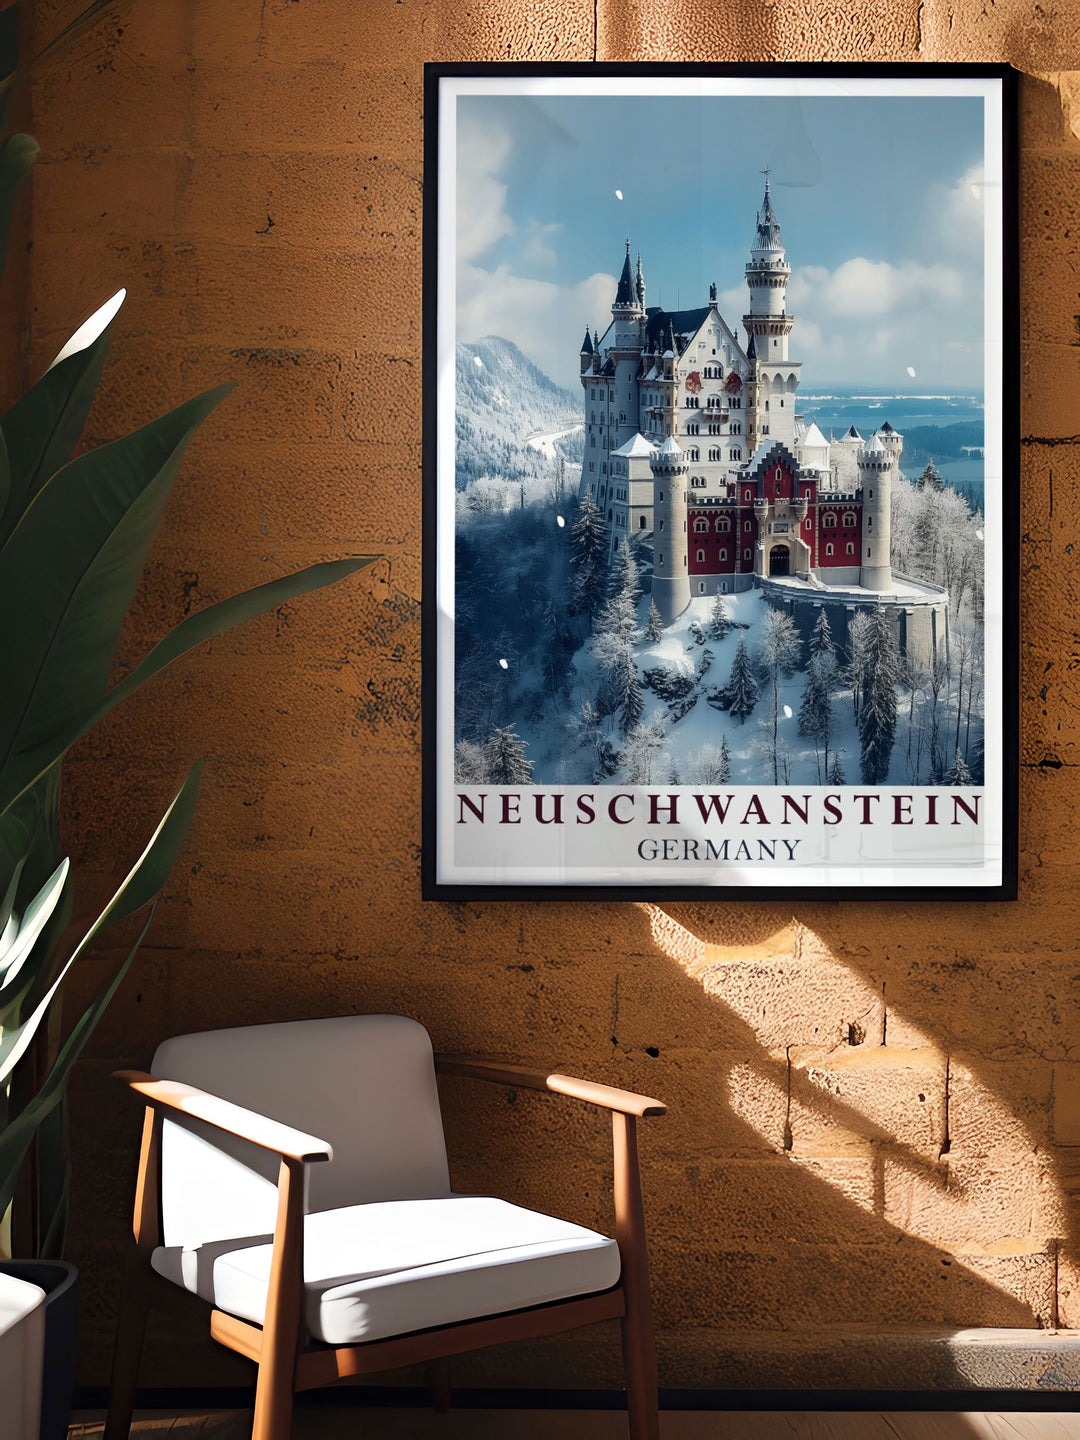 Black and white Neuschwanstein Castle photo print showcasing the castles intricate details. Ideal for adding a classic touch to your home decor with this fine art print.